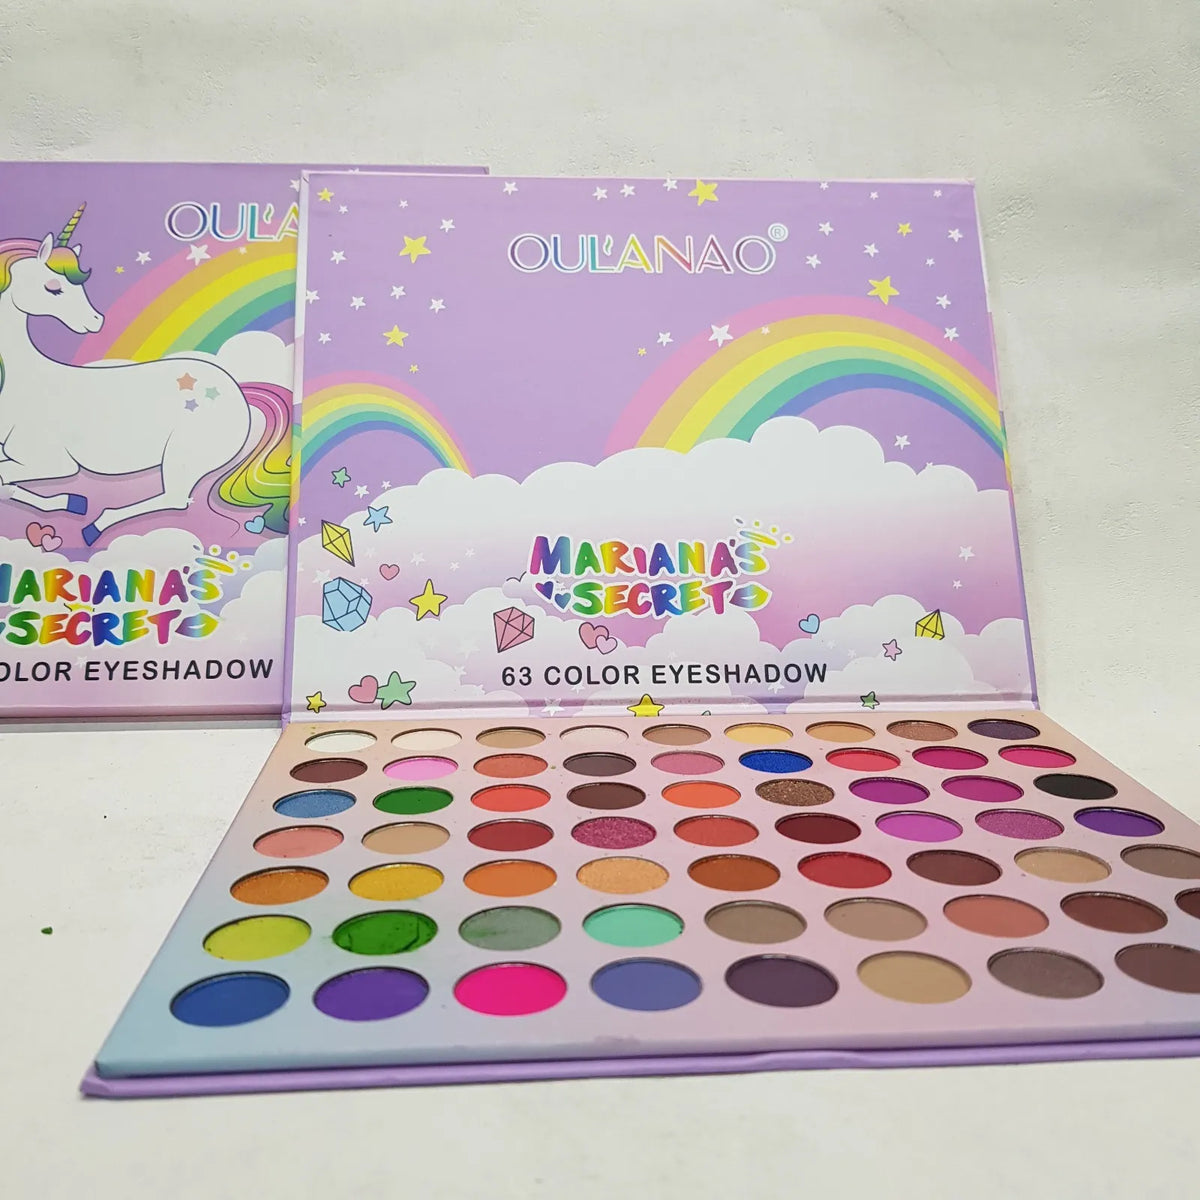 OULANAO 63 color eyeshadow